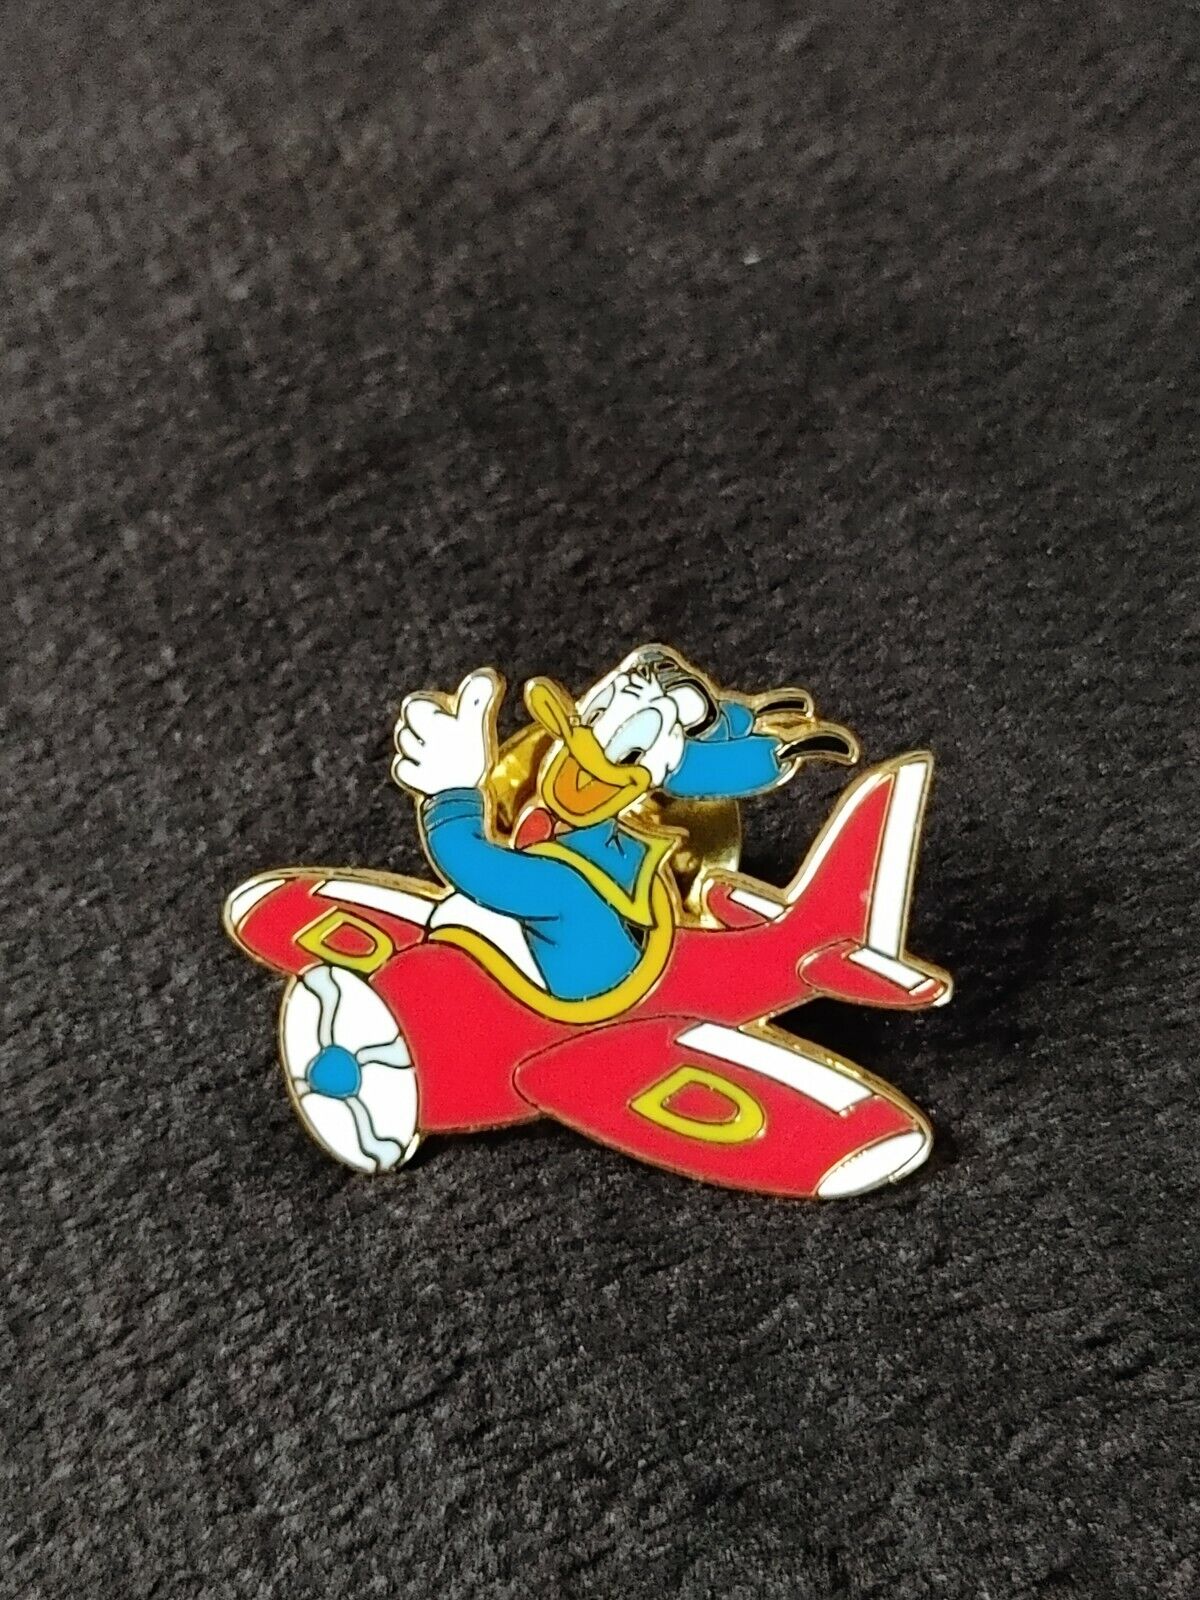 Disney Trading Pin Donald Duck Red Airplane Pilot Plane Flying Travel Co Vintage